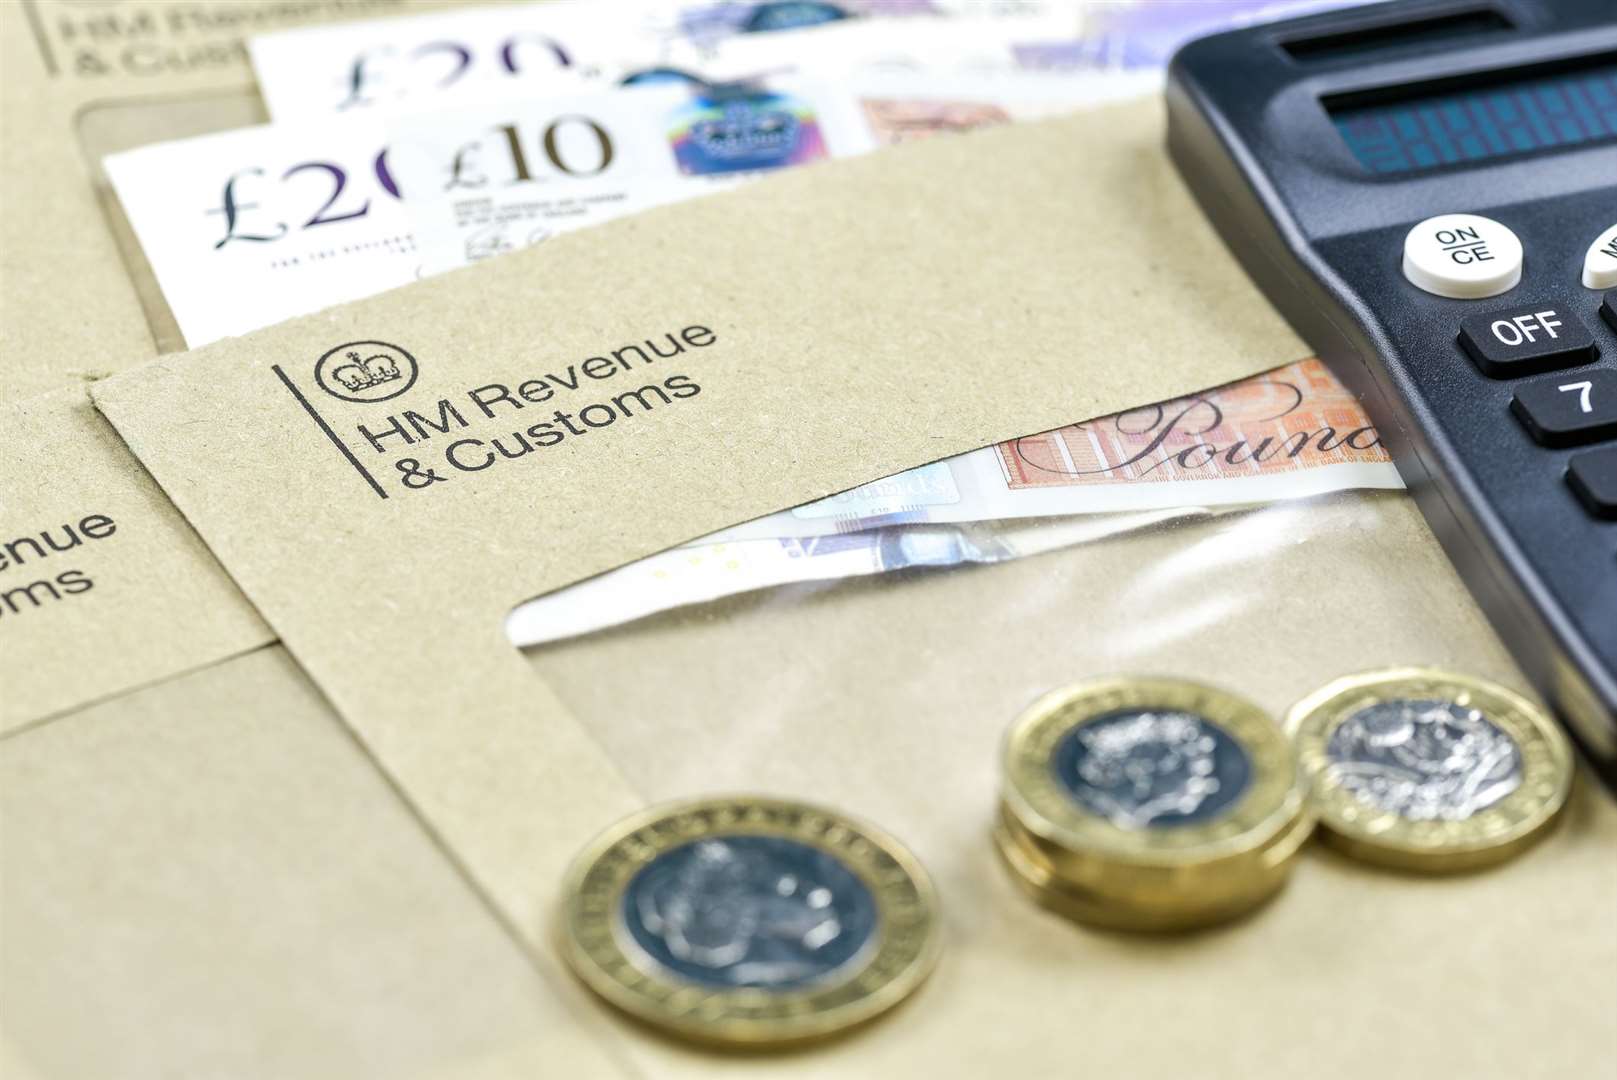 If people don't renew their claims by July 31 they risk payments being stopped, says HMRC